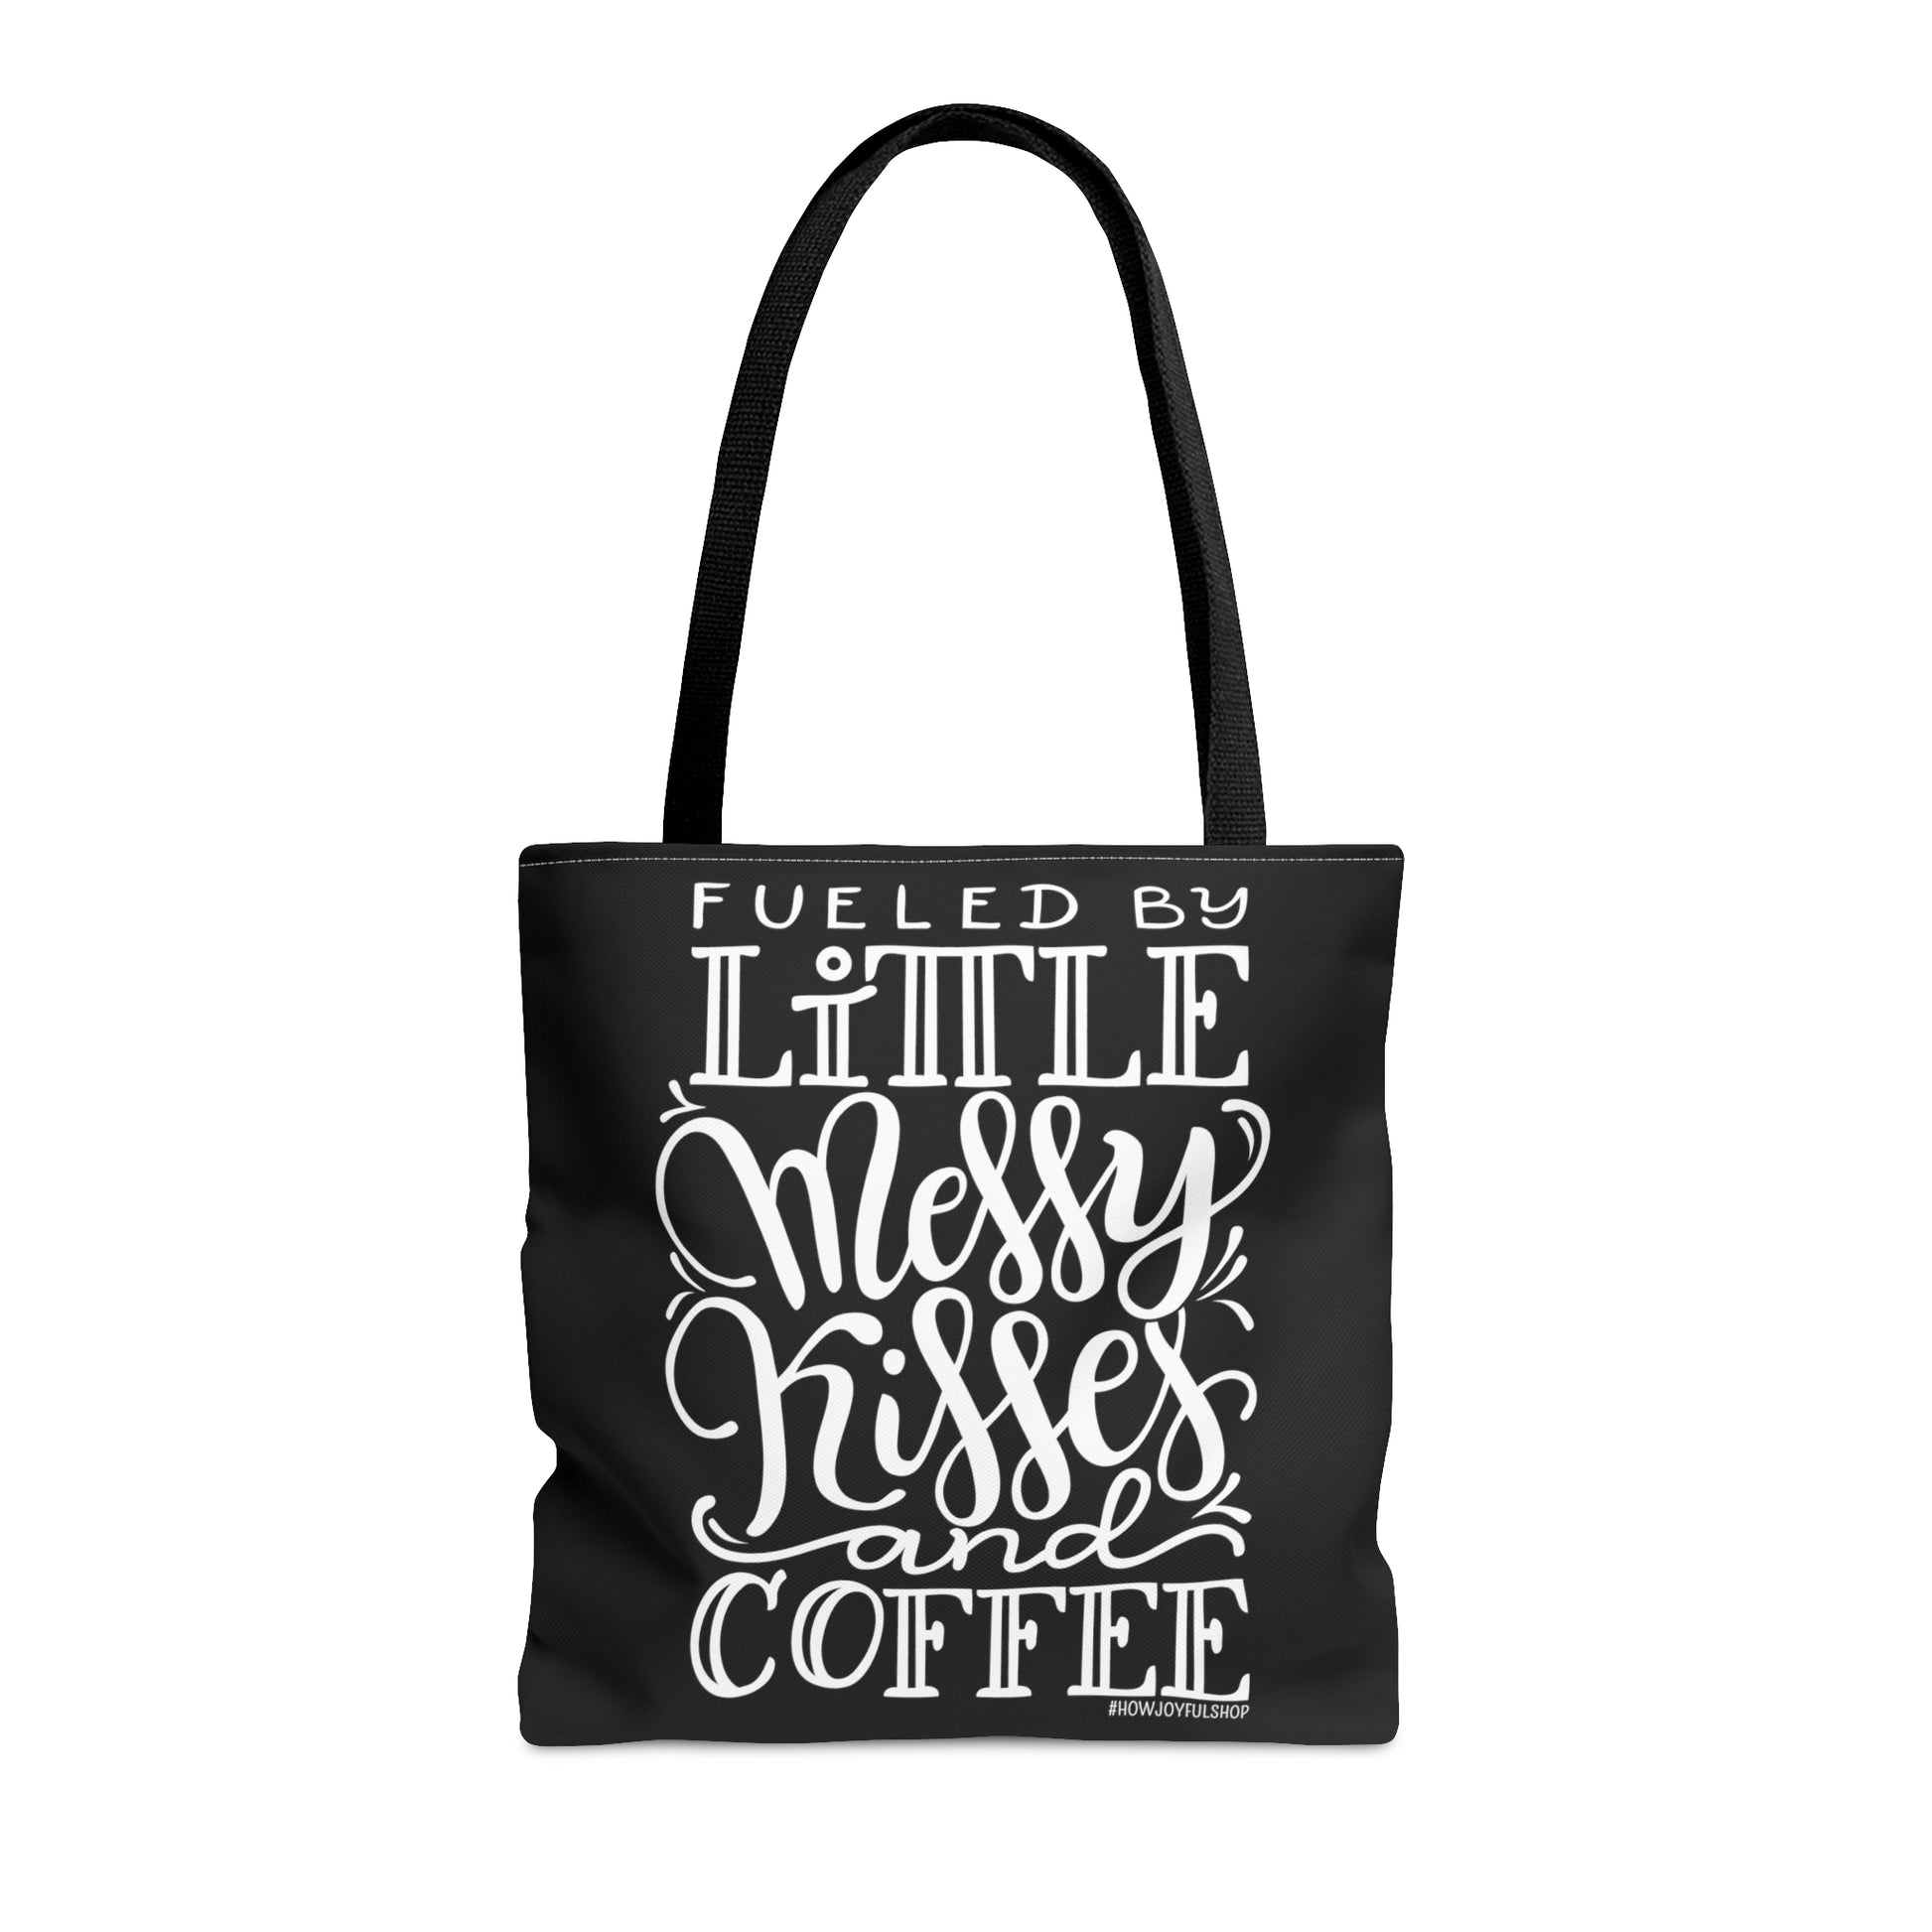 Fueled by little messy kisses and coffee - Tote Bag - howjoyfulshop